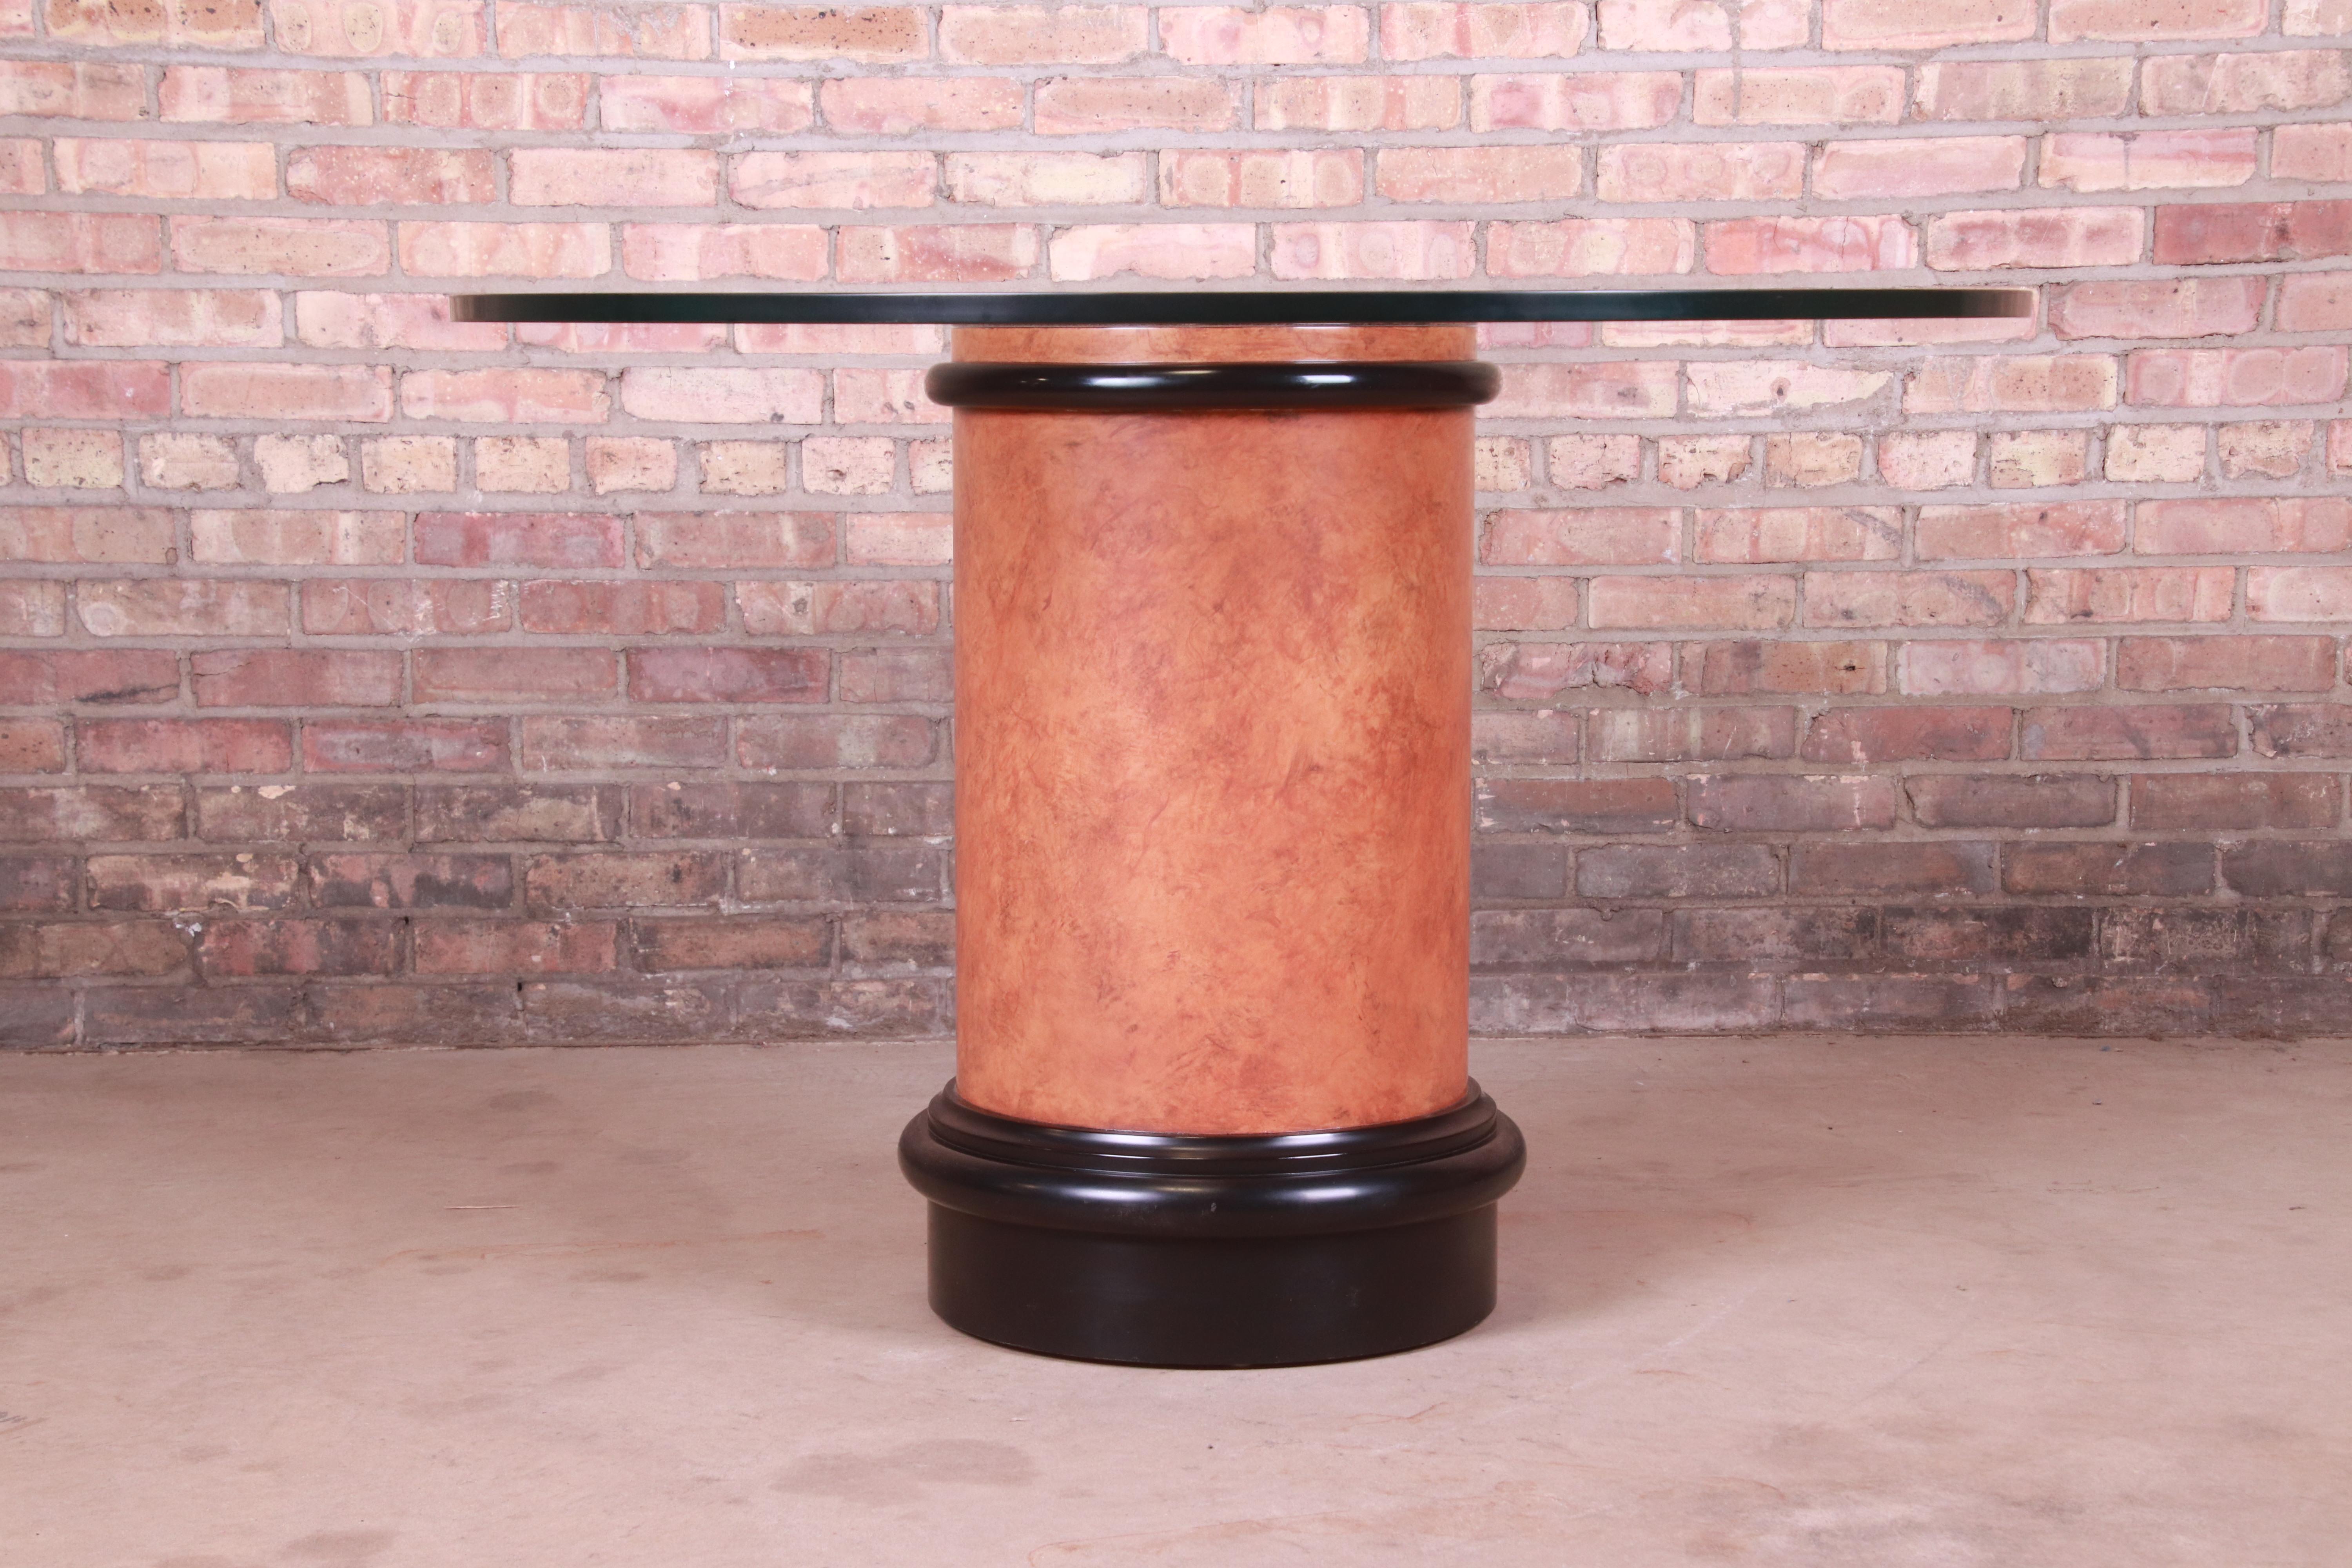 A gorgeous modern pedestal dining or center table

In the manner of Karl Springer

Circa 1970s

Burl wood and black lacquer pedestal base, with round glass top.

Measures: 44